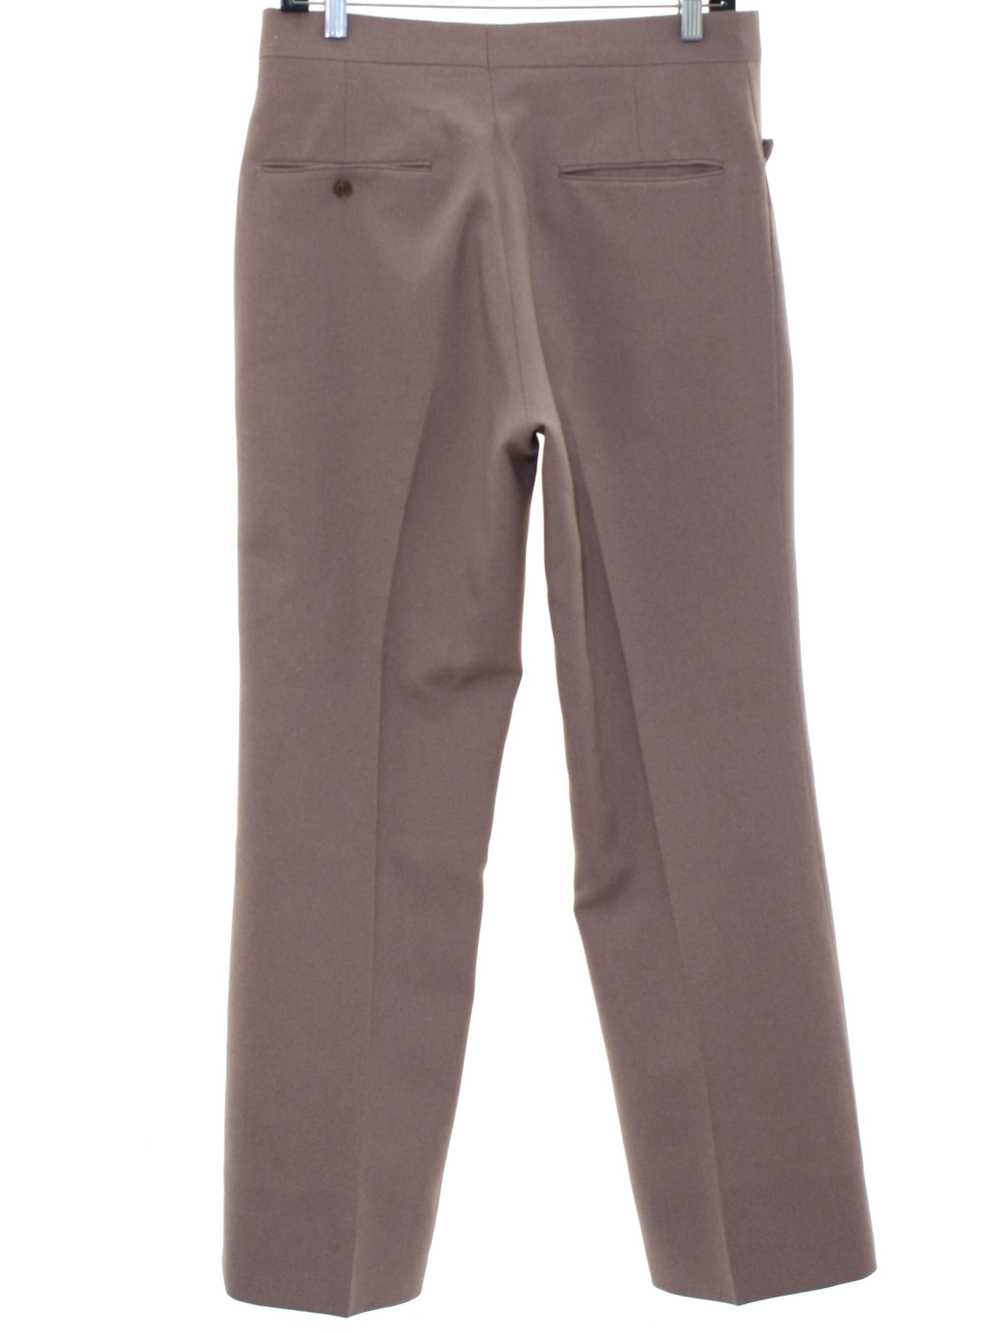 1970's Mens Flared Leisure Pants - image 3